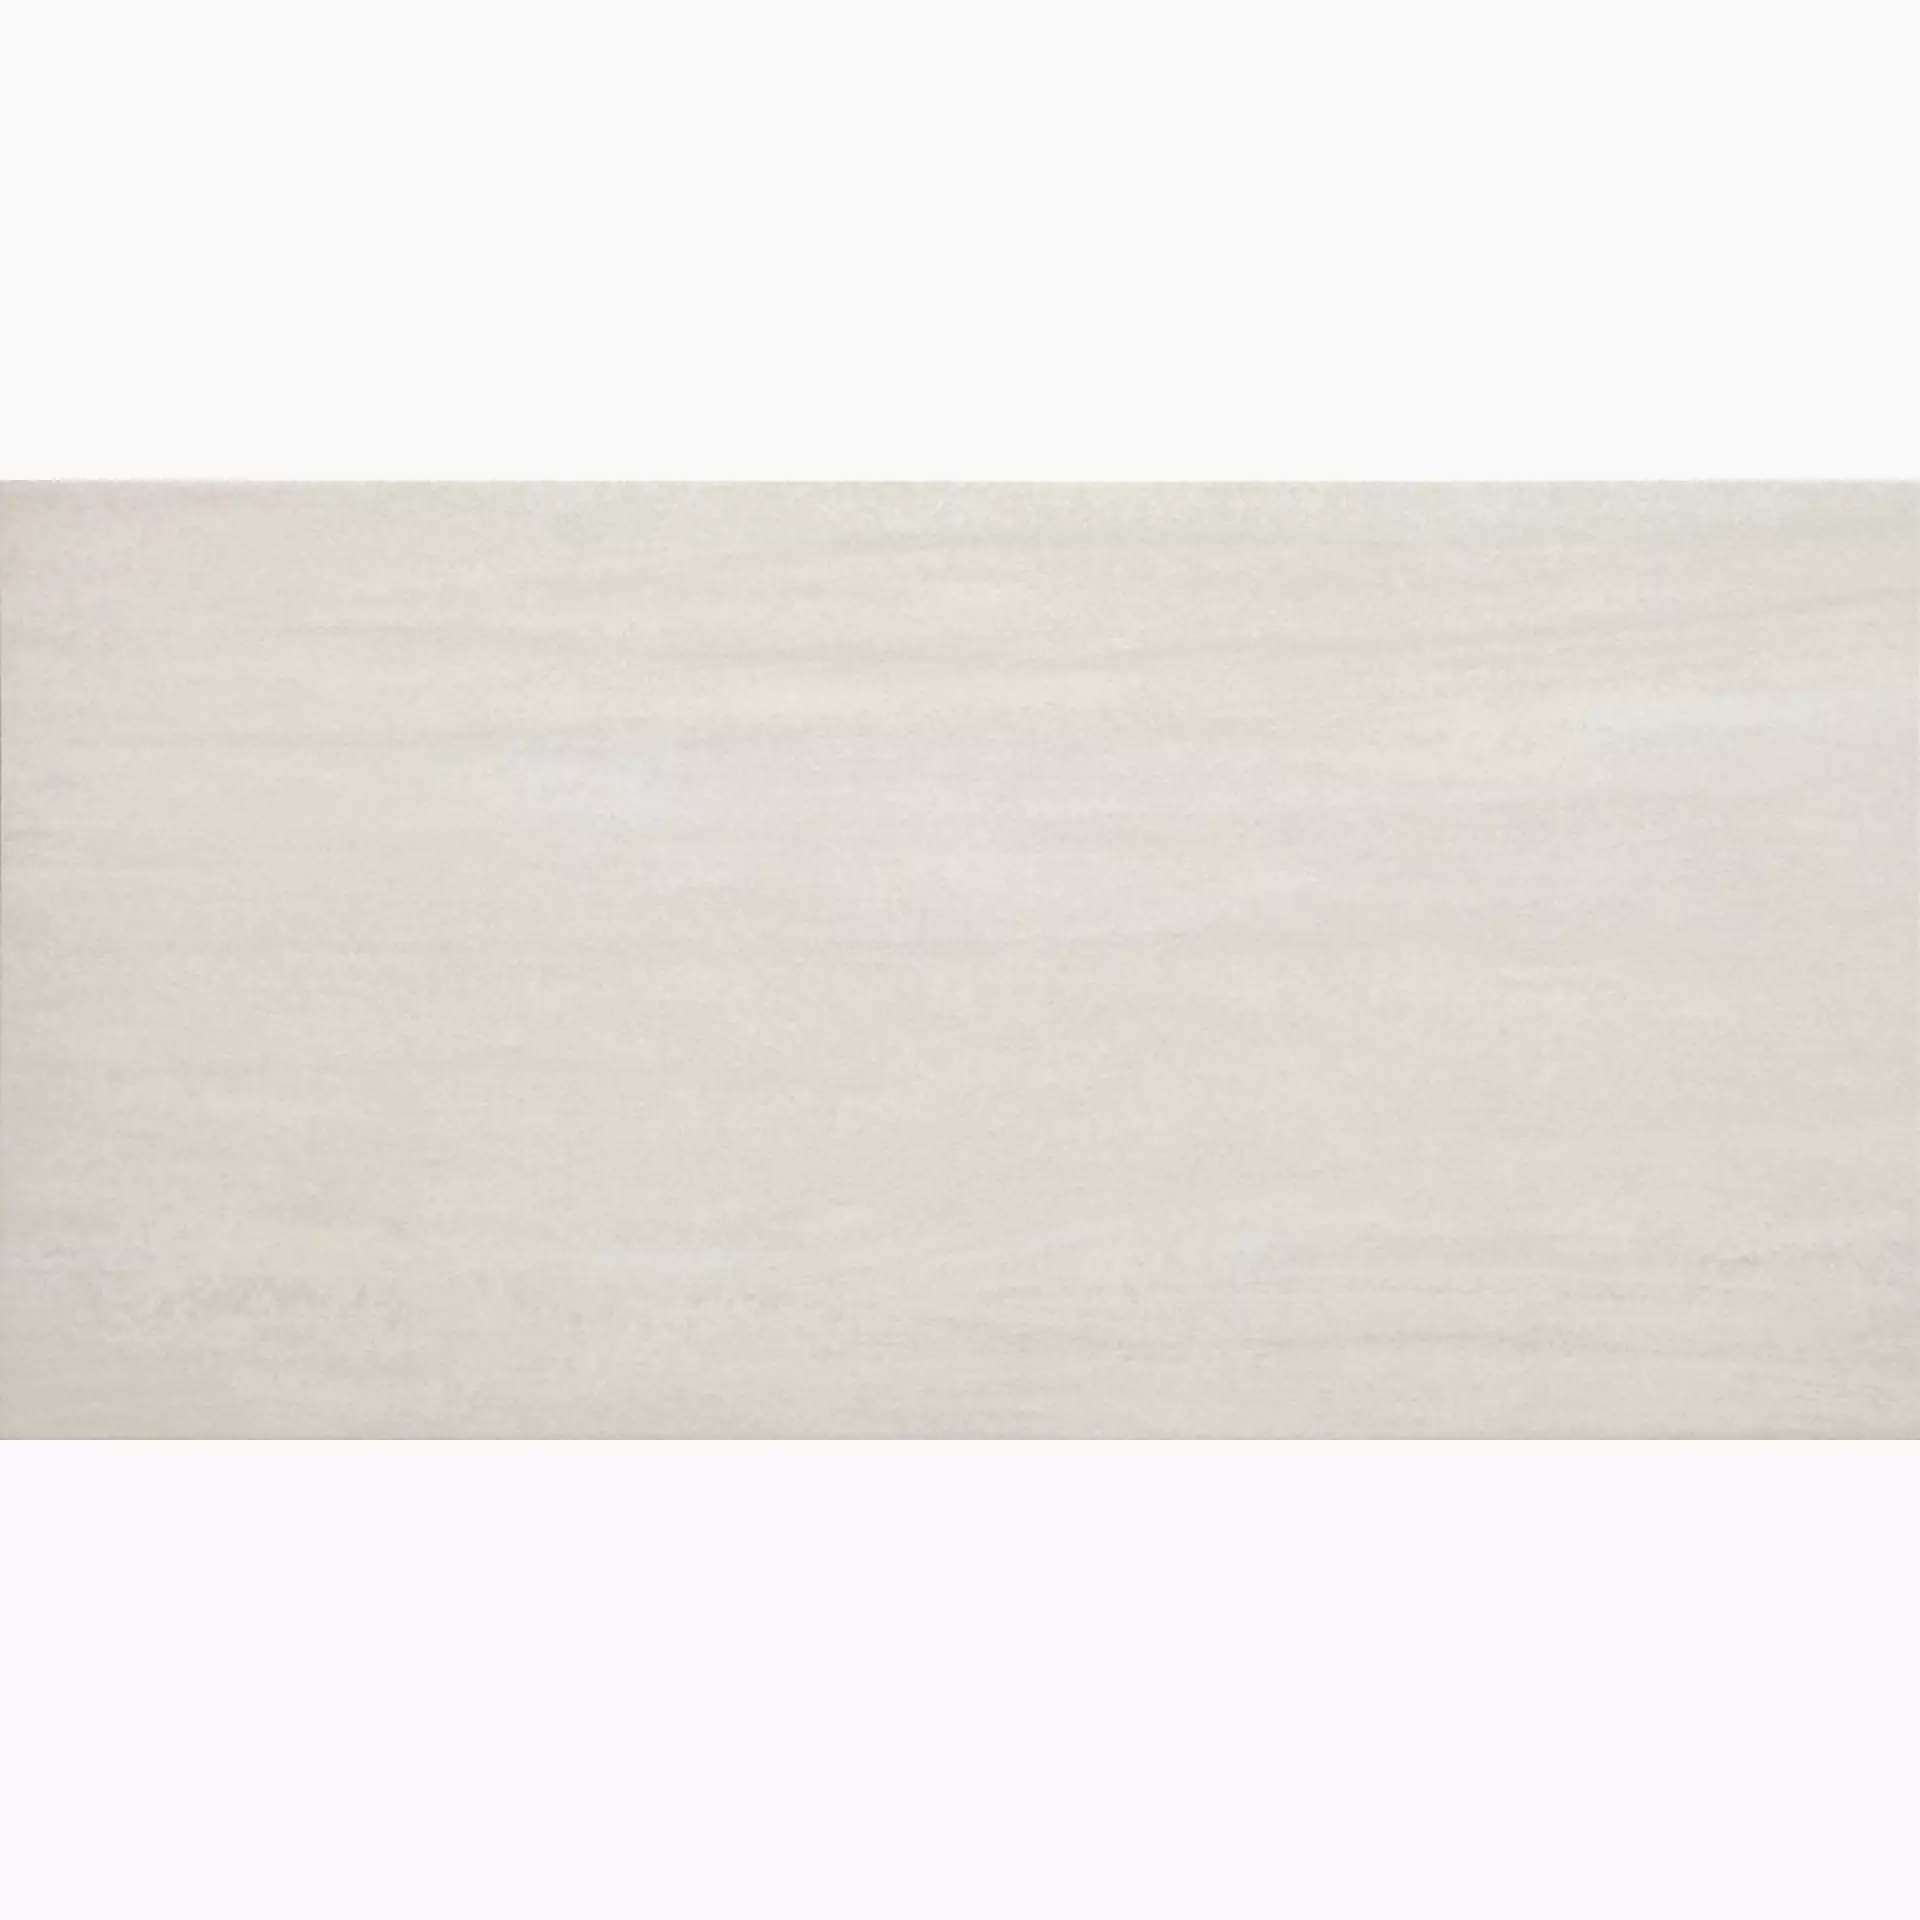 Rondine Contract White Naturale J84570 30x60cm rectified 9,5mm